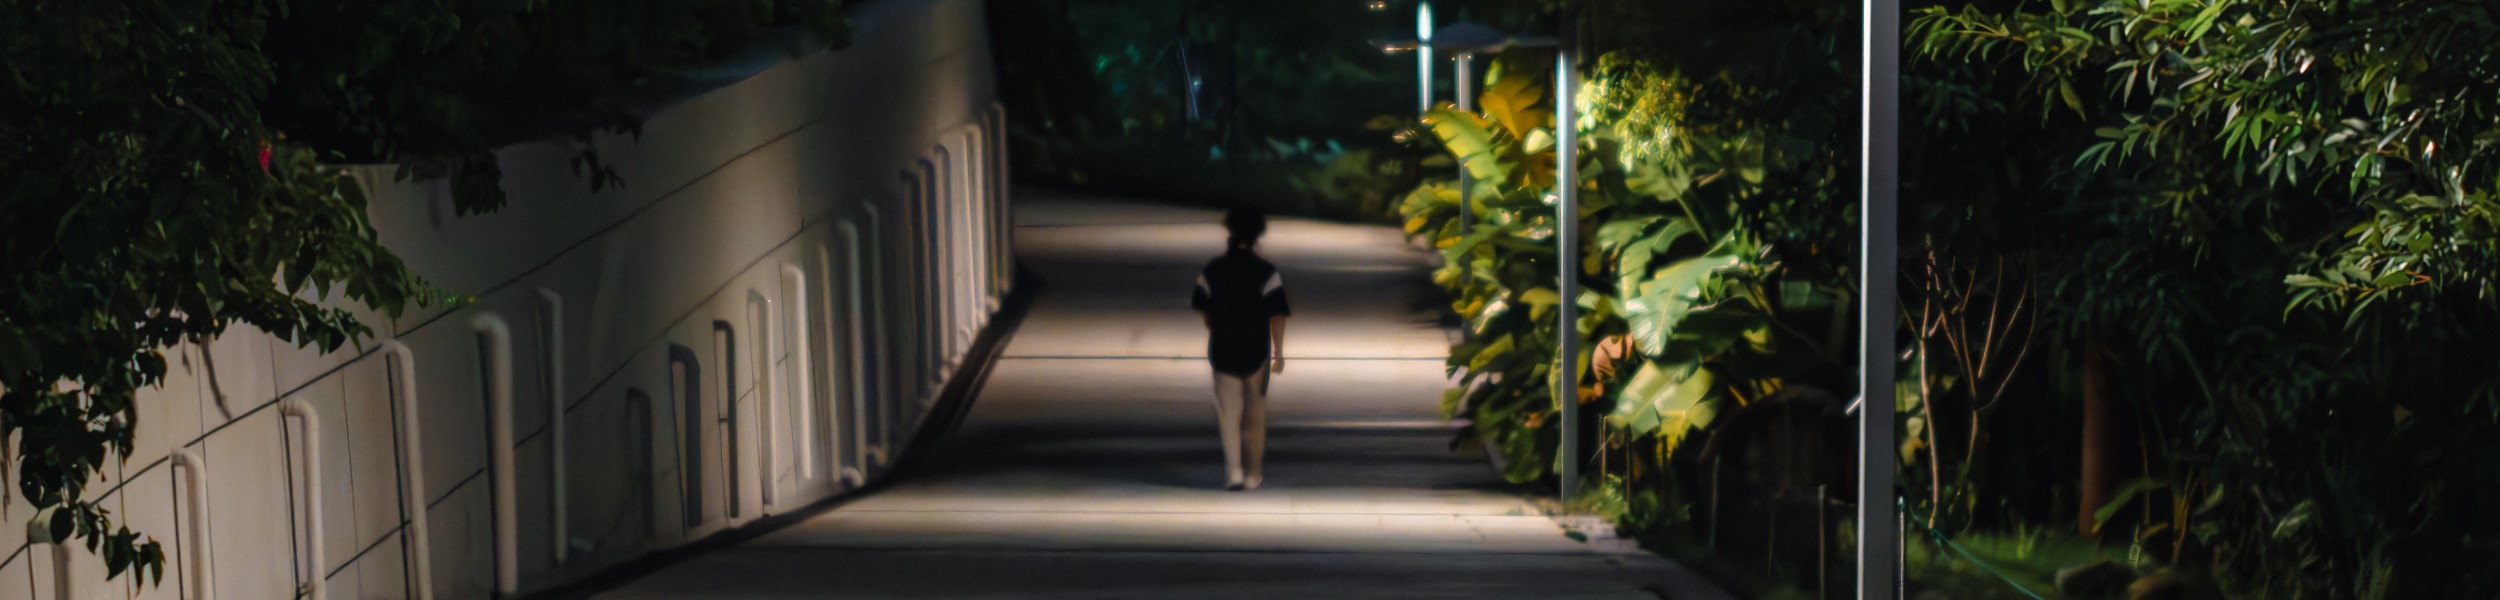 College student walking alone at night